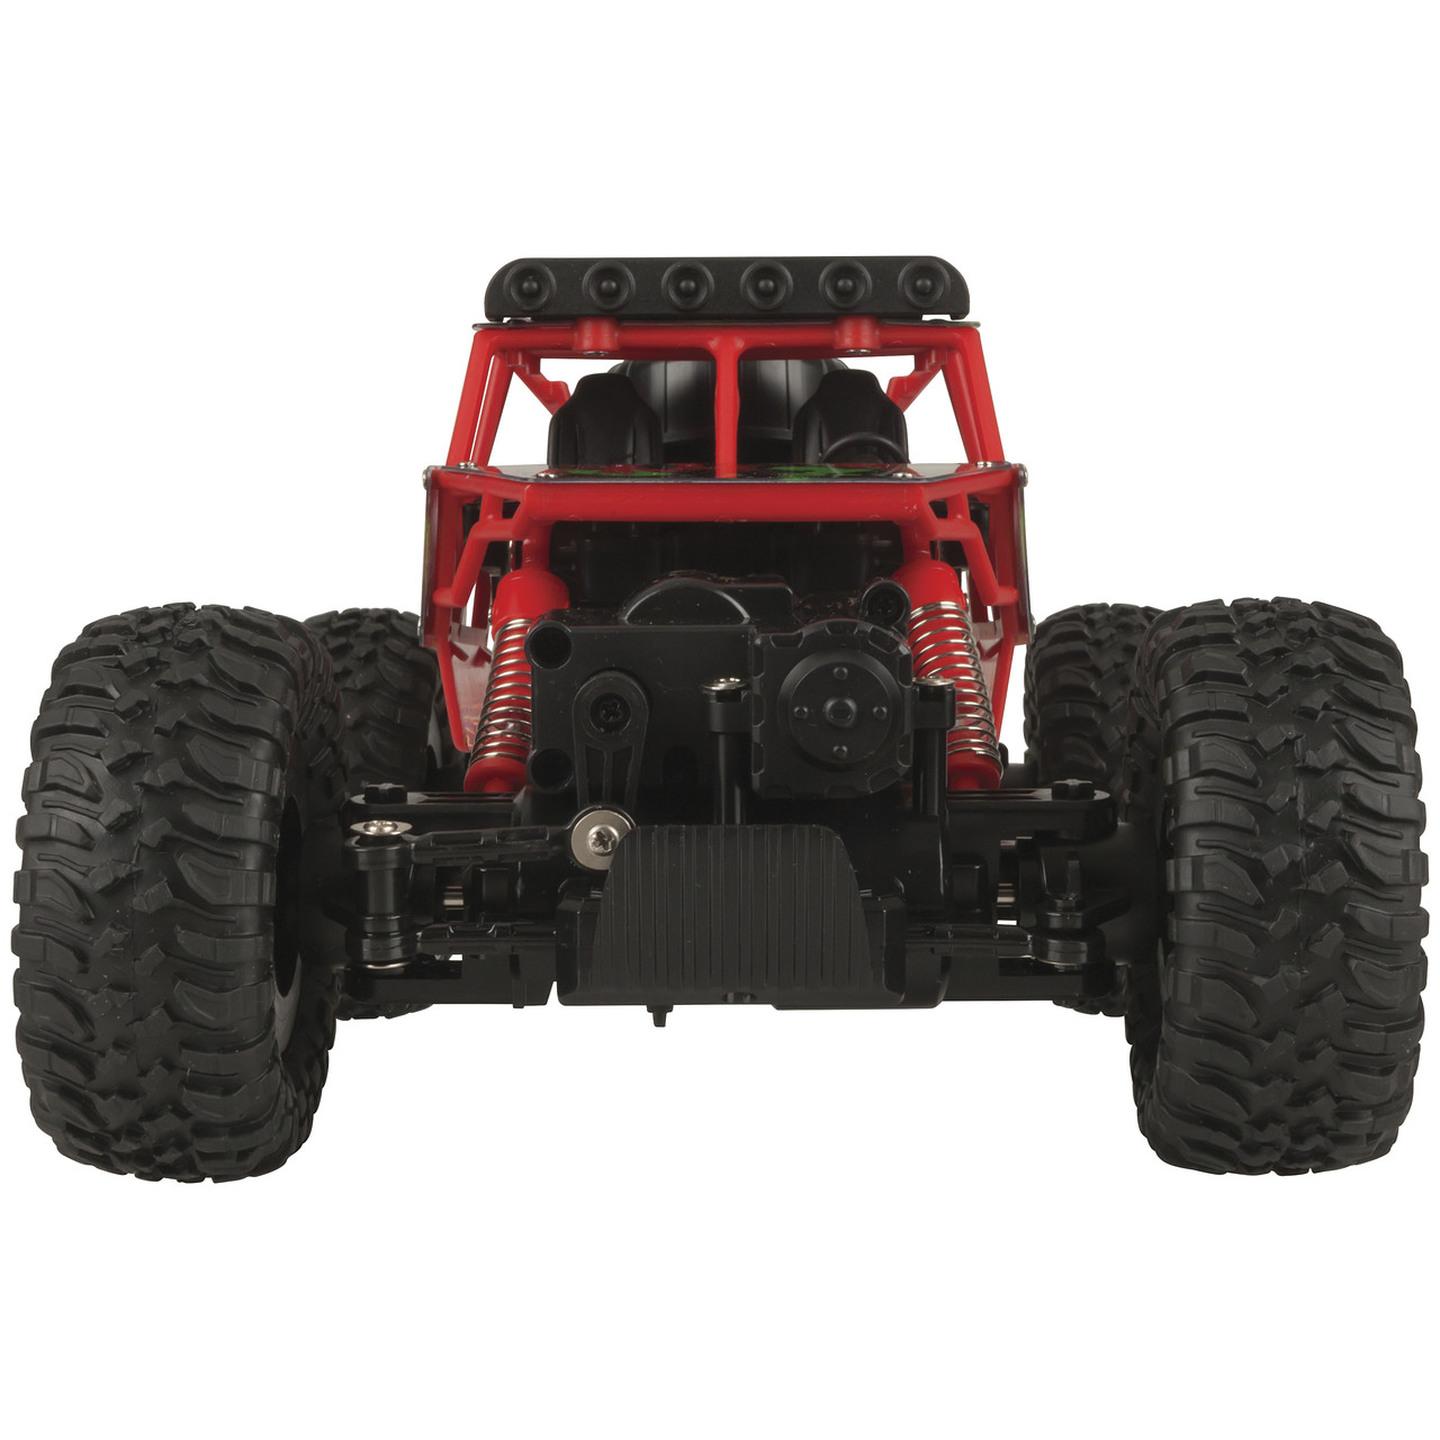 4WD Remote Control Off-Road Buggy